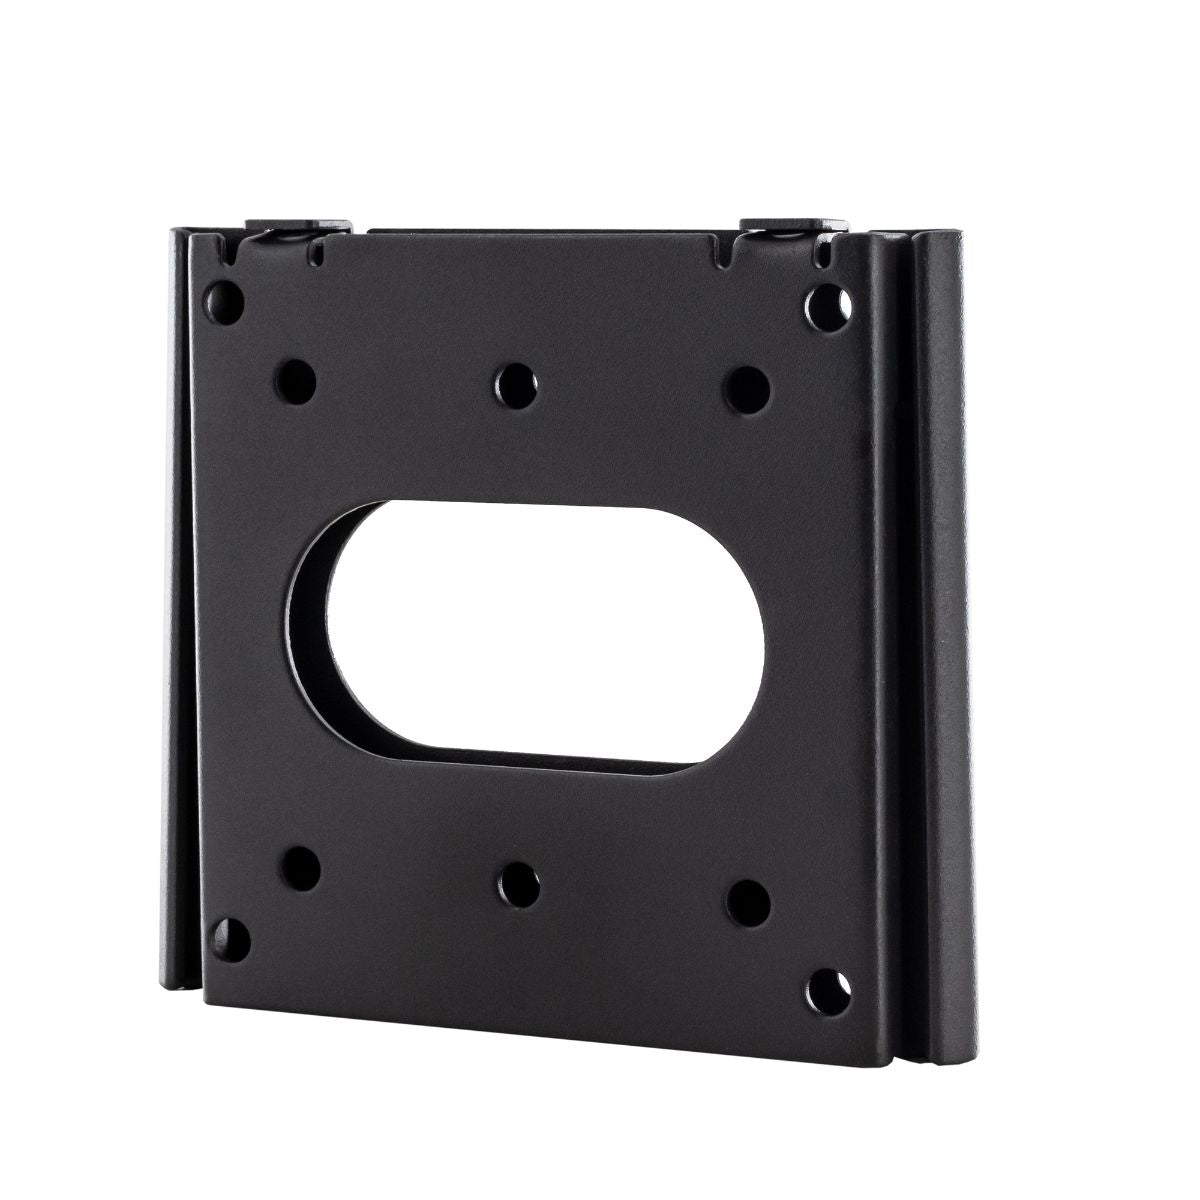 Quick-Detach Security VESA Plate Slide for Museums, Galleries, Trade Shows & more